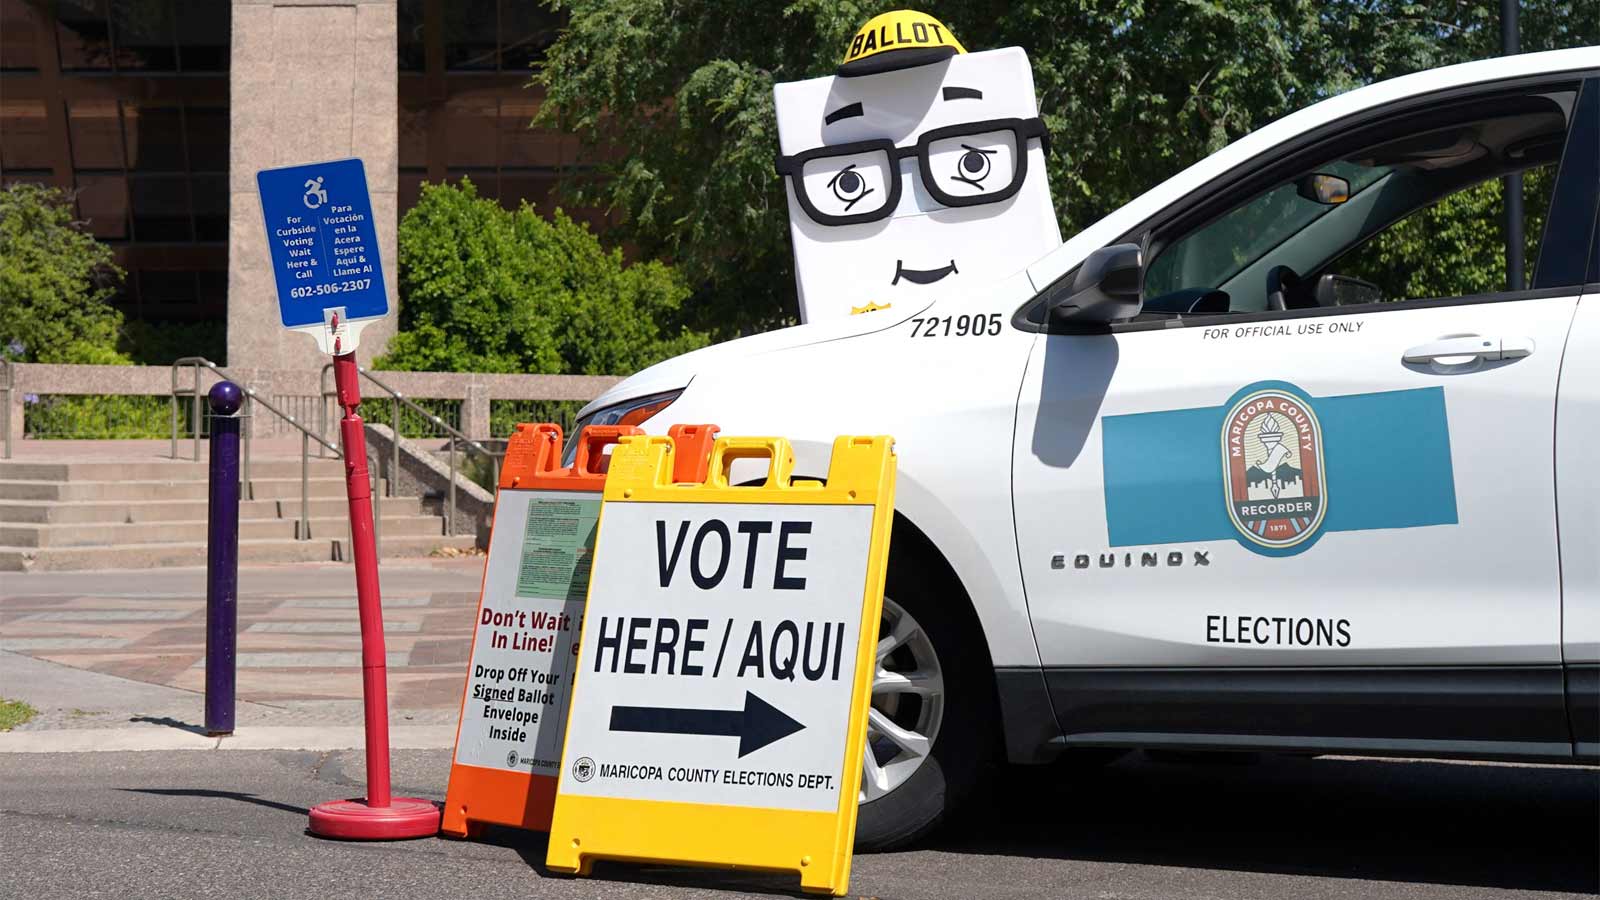 Maricopa County Elections Department mascot Phil the Ballot stands behind a county car and a sign t...